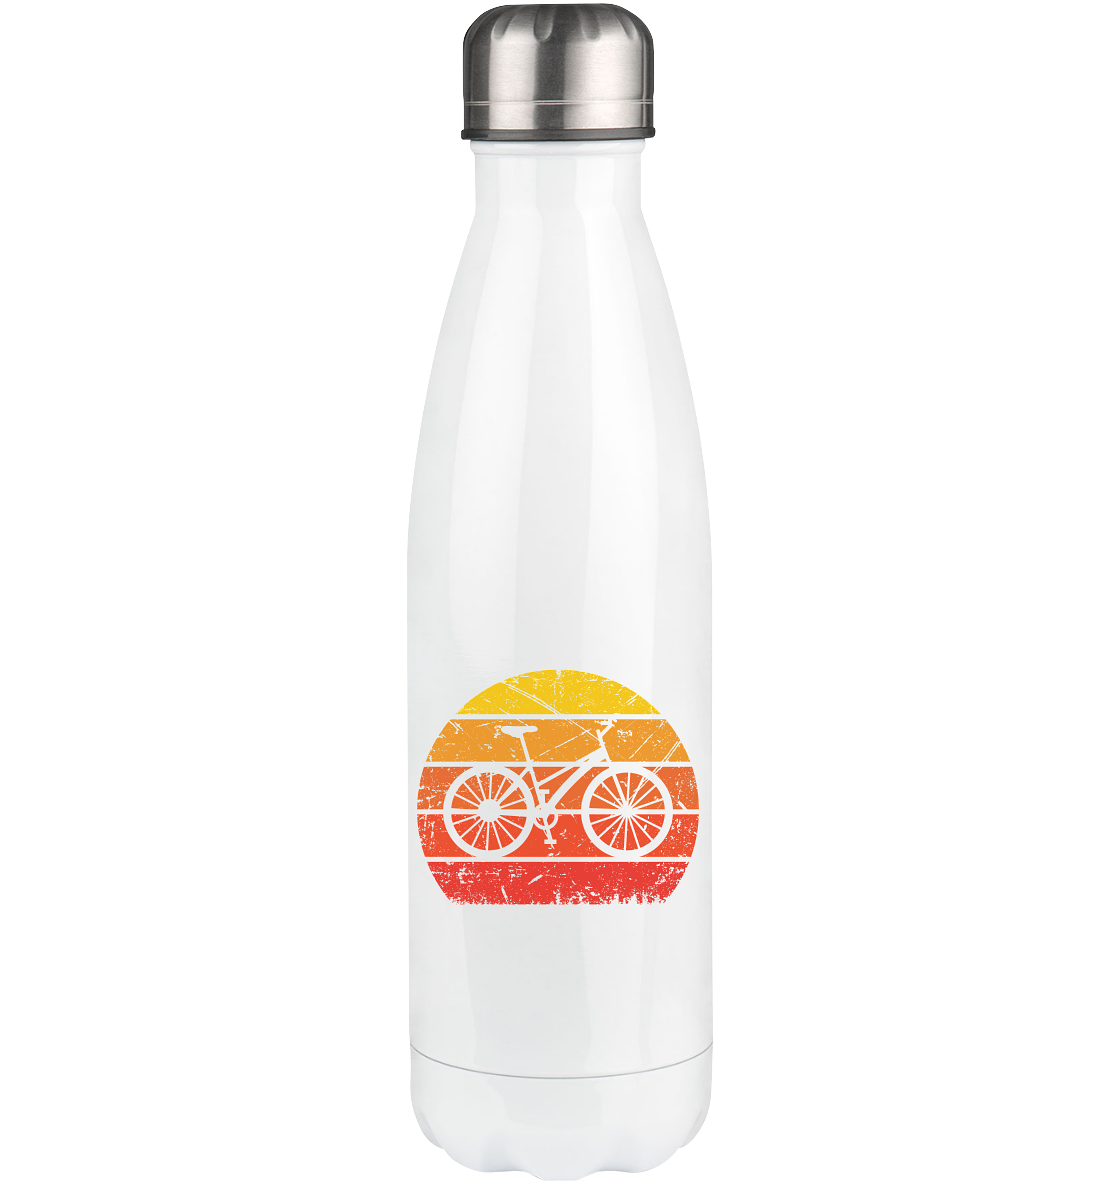 Vintage Sun and Cycling - Edelstahl Thermosflasche fahrrad 500ml